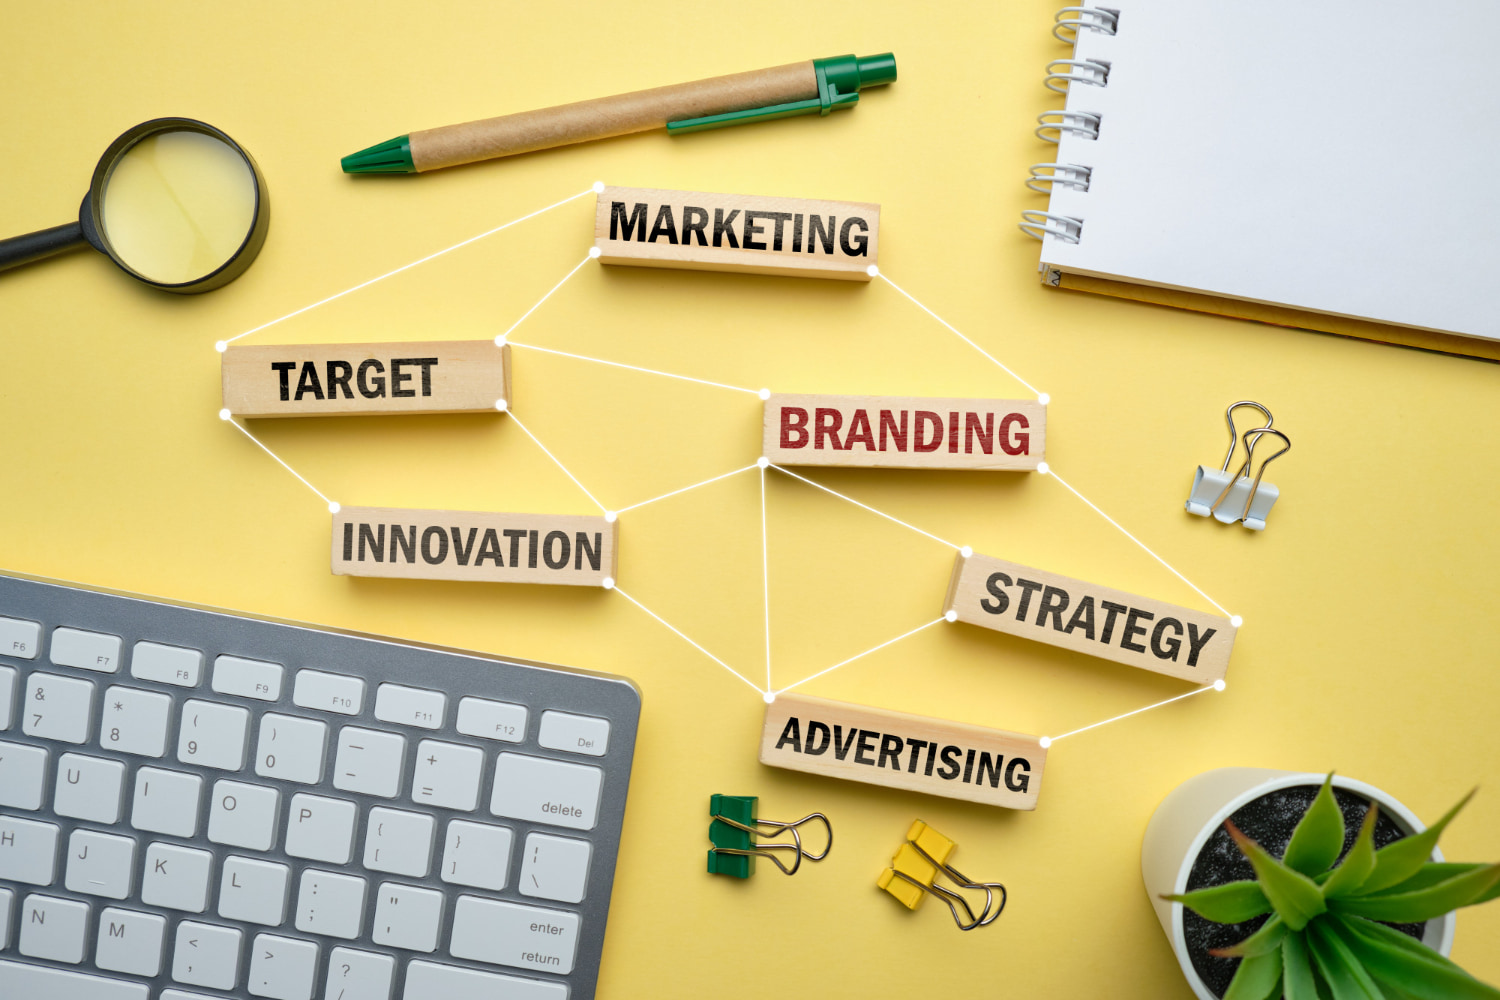  Role of a Brand Strategist
